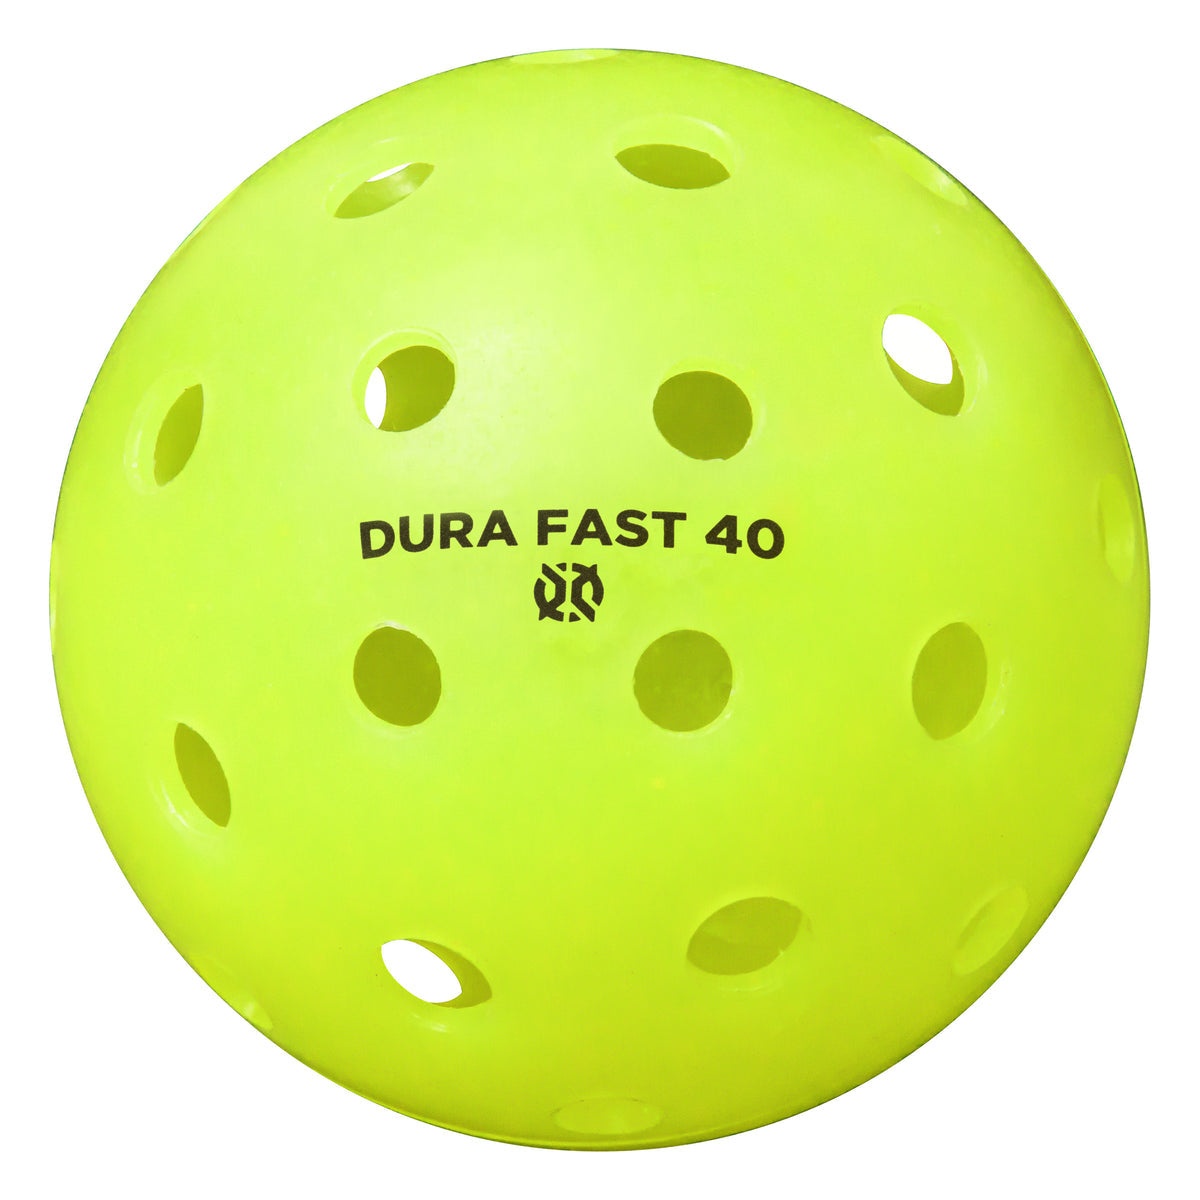 An Onix yellow ball with the words dura fast 40 on it.